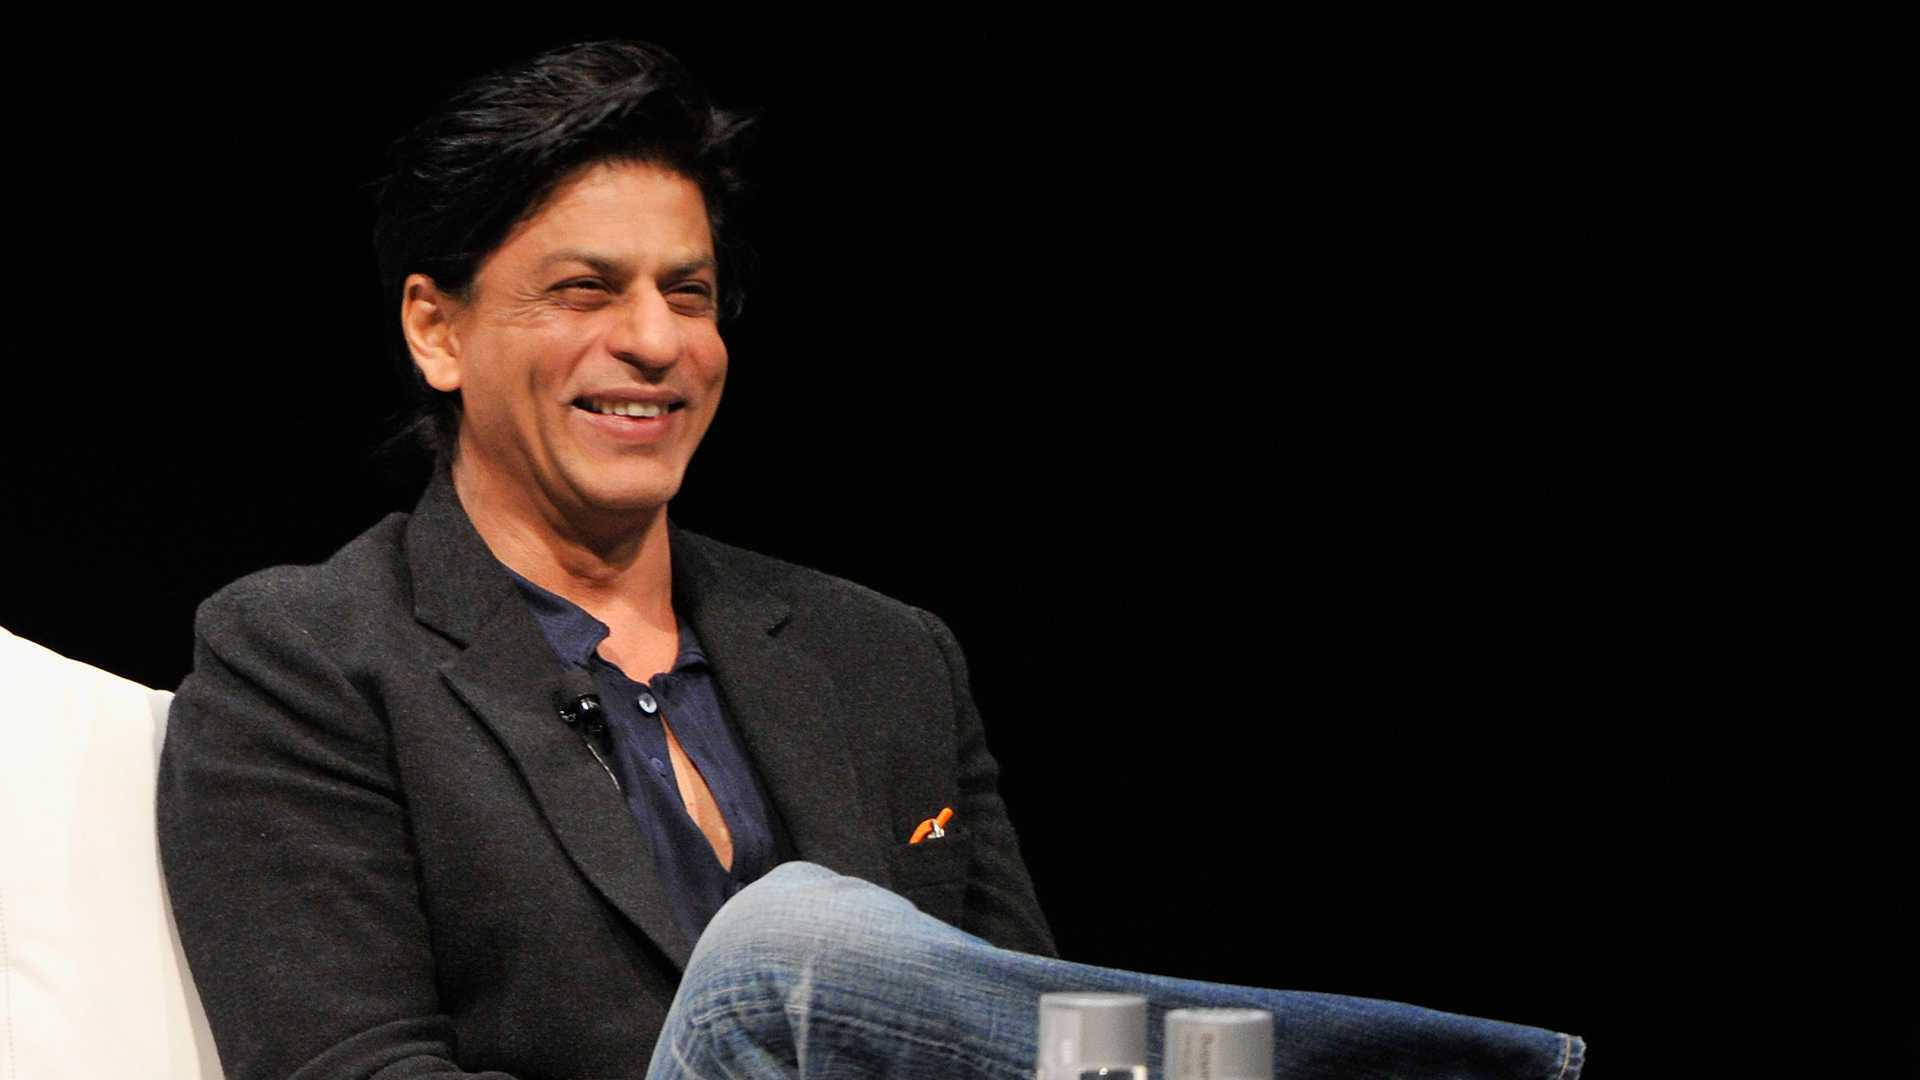 Shah Rukh Khan Doesn't Care About 'Raees' Clashing With Salman's 'Sultan' |  HuffPost News